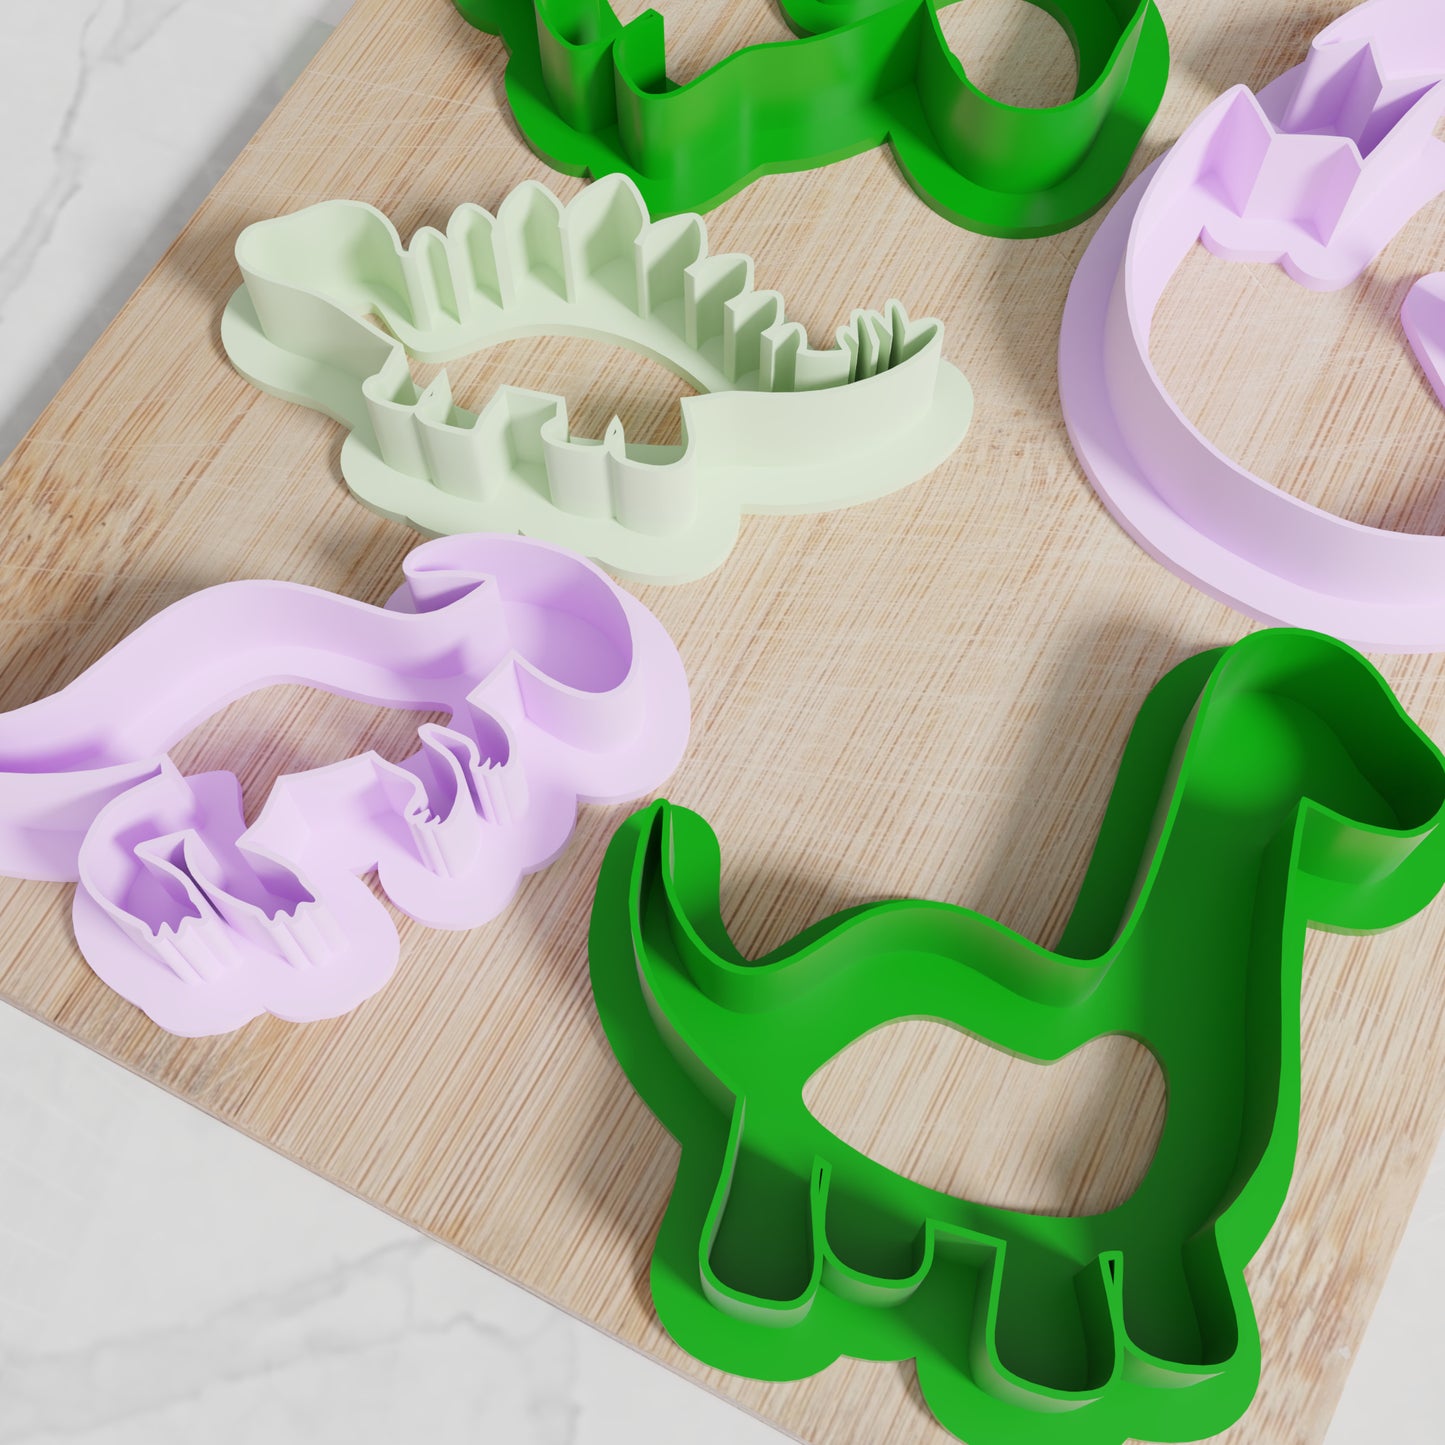 Dinosaur Cookie Cutters. Set of 8 Premium Dinosaur Cookie Cutters. Four Sizes, Tons Of Colors!